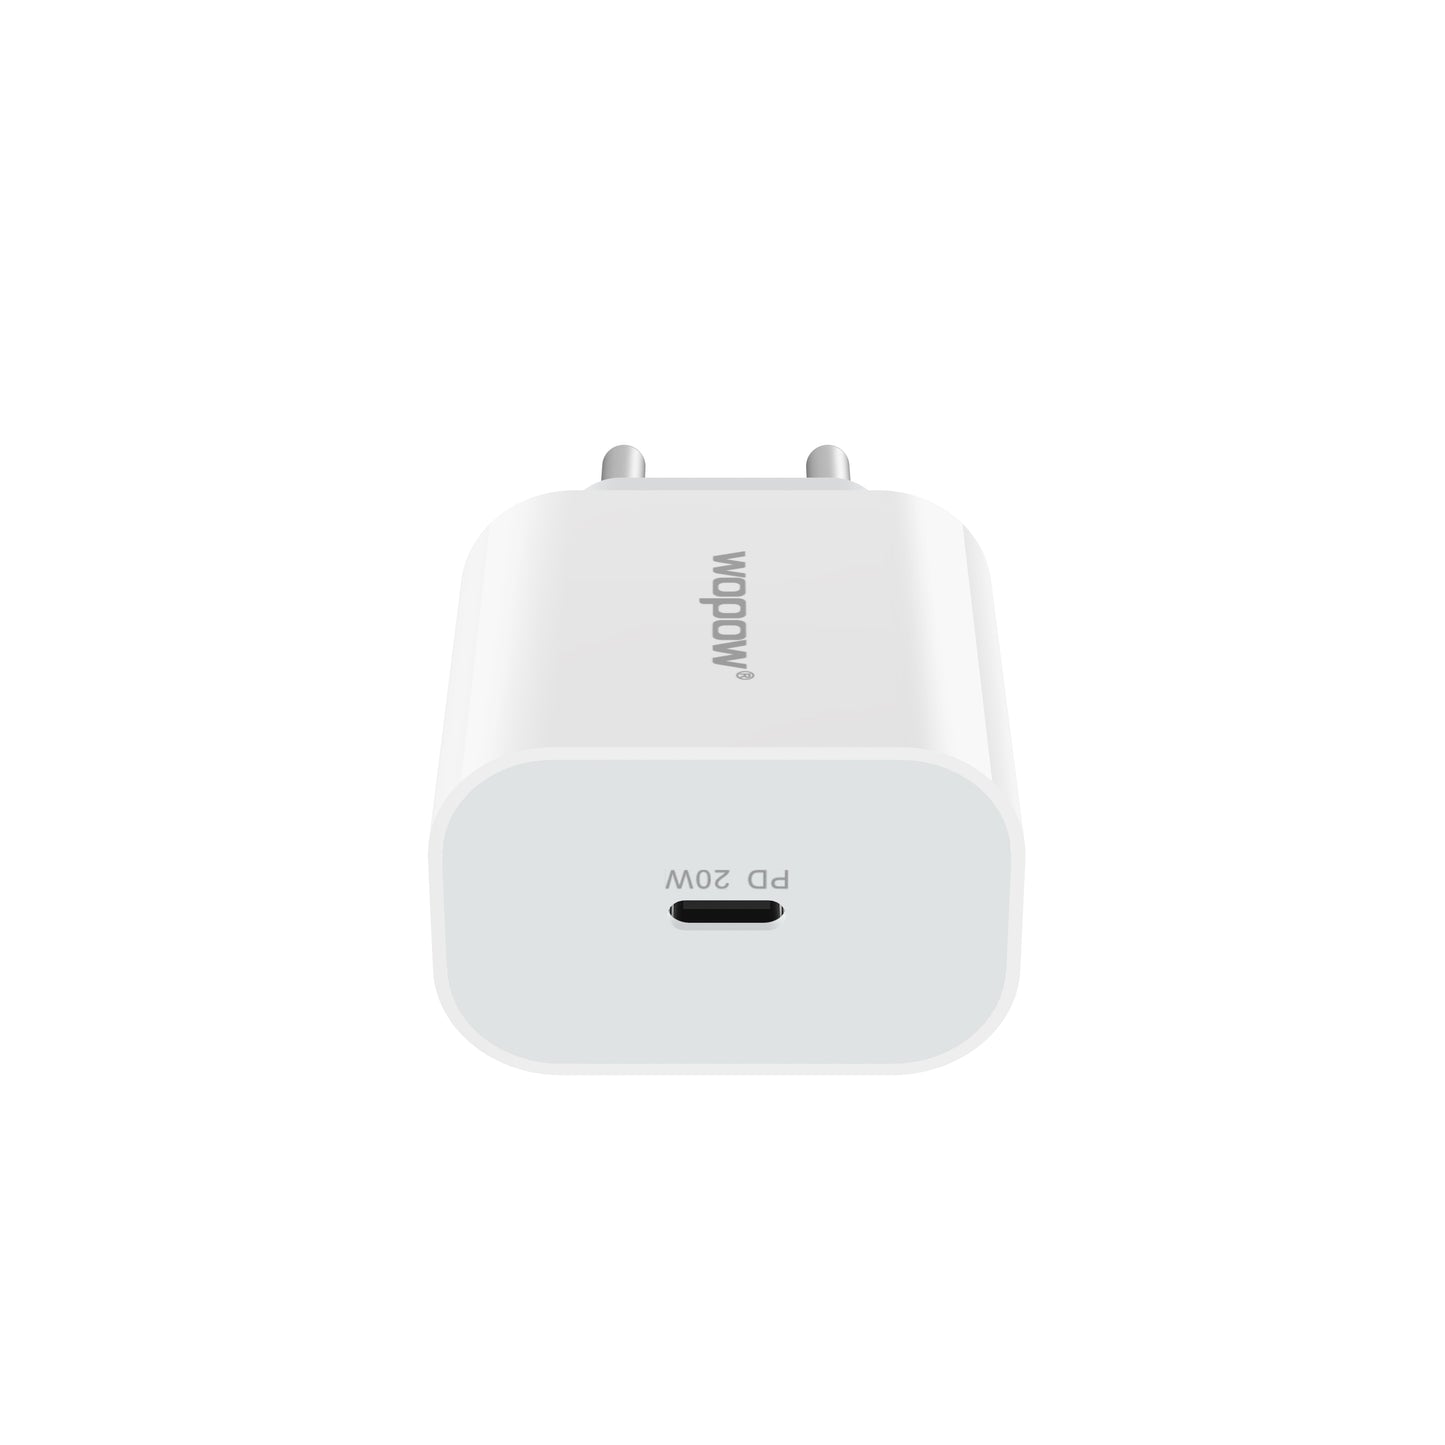 WOPOW Wall Charger